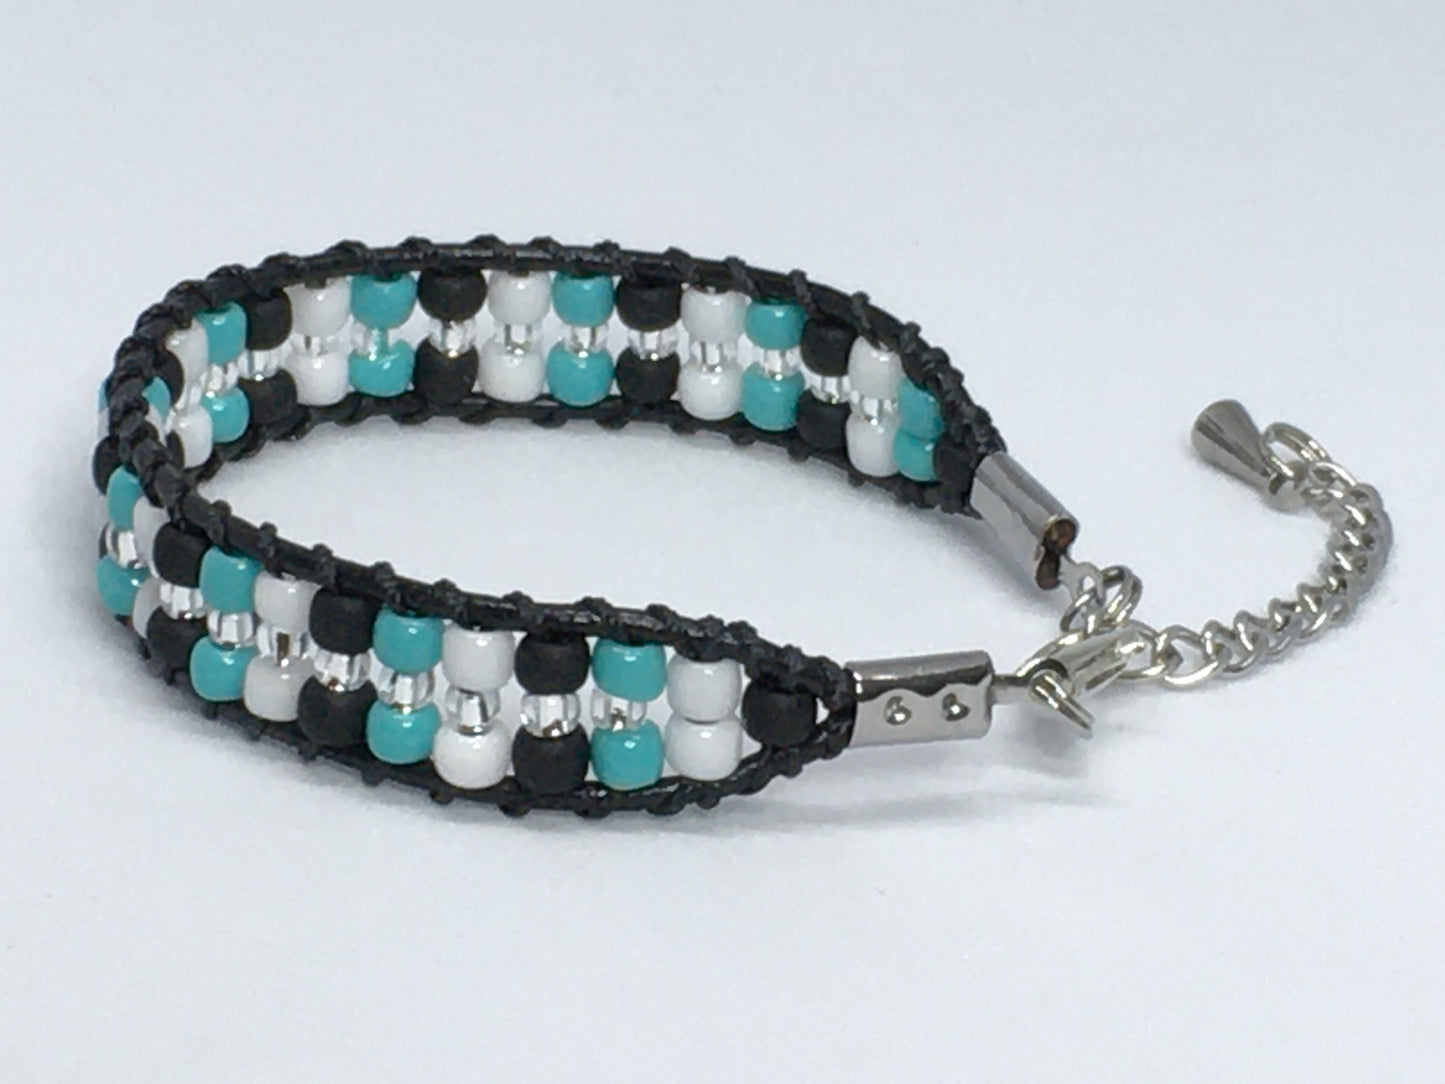 6" Bead and Leather Women's Bracelet